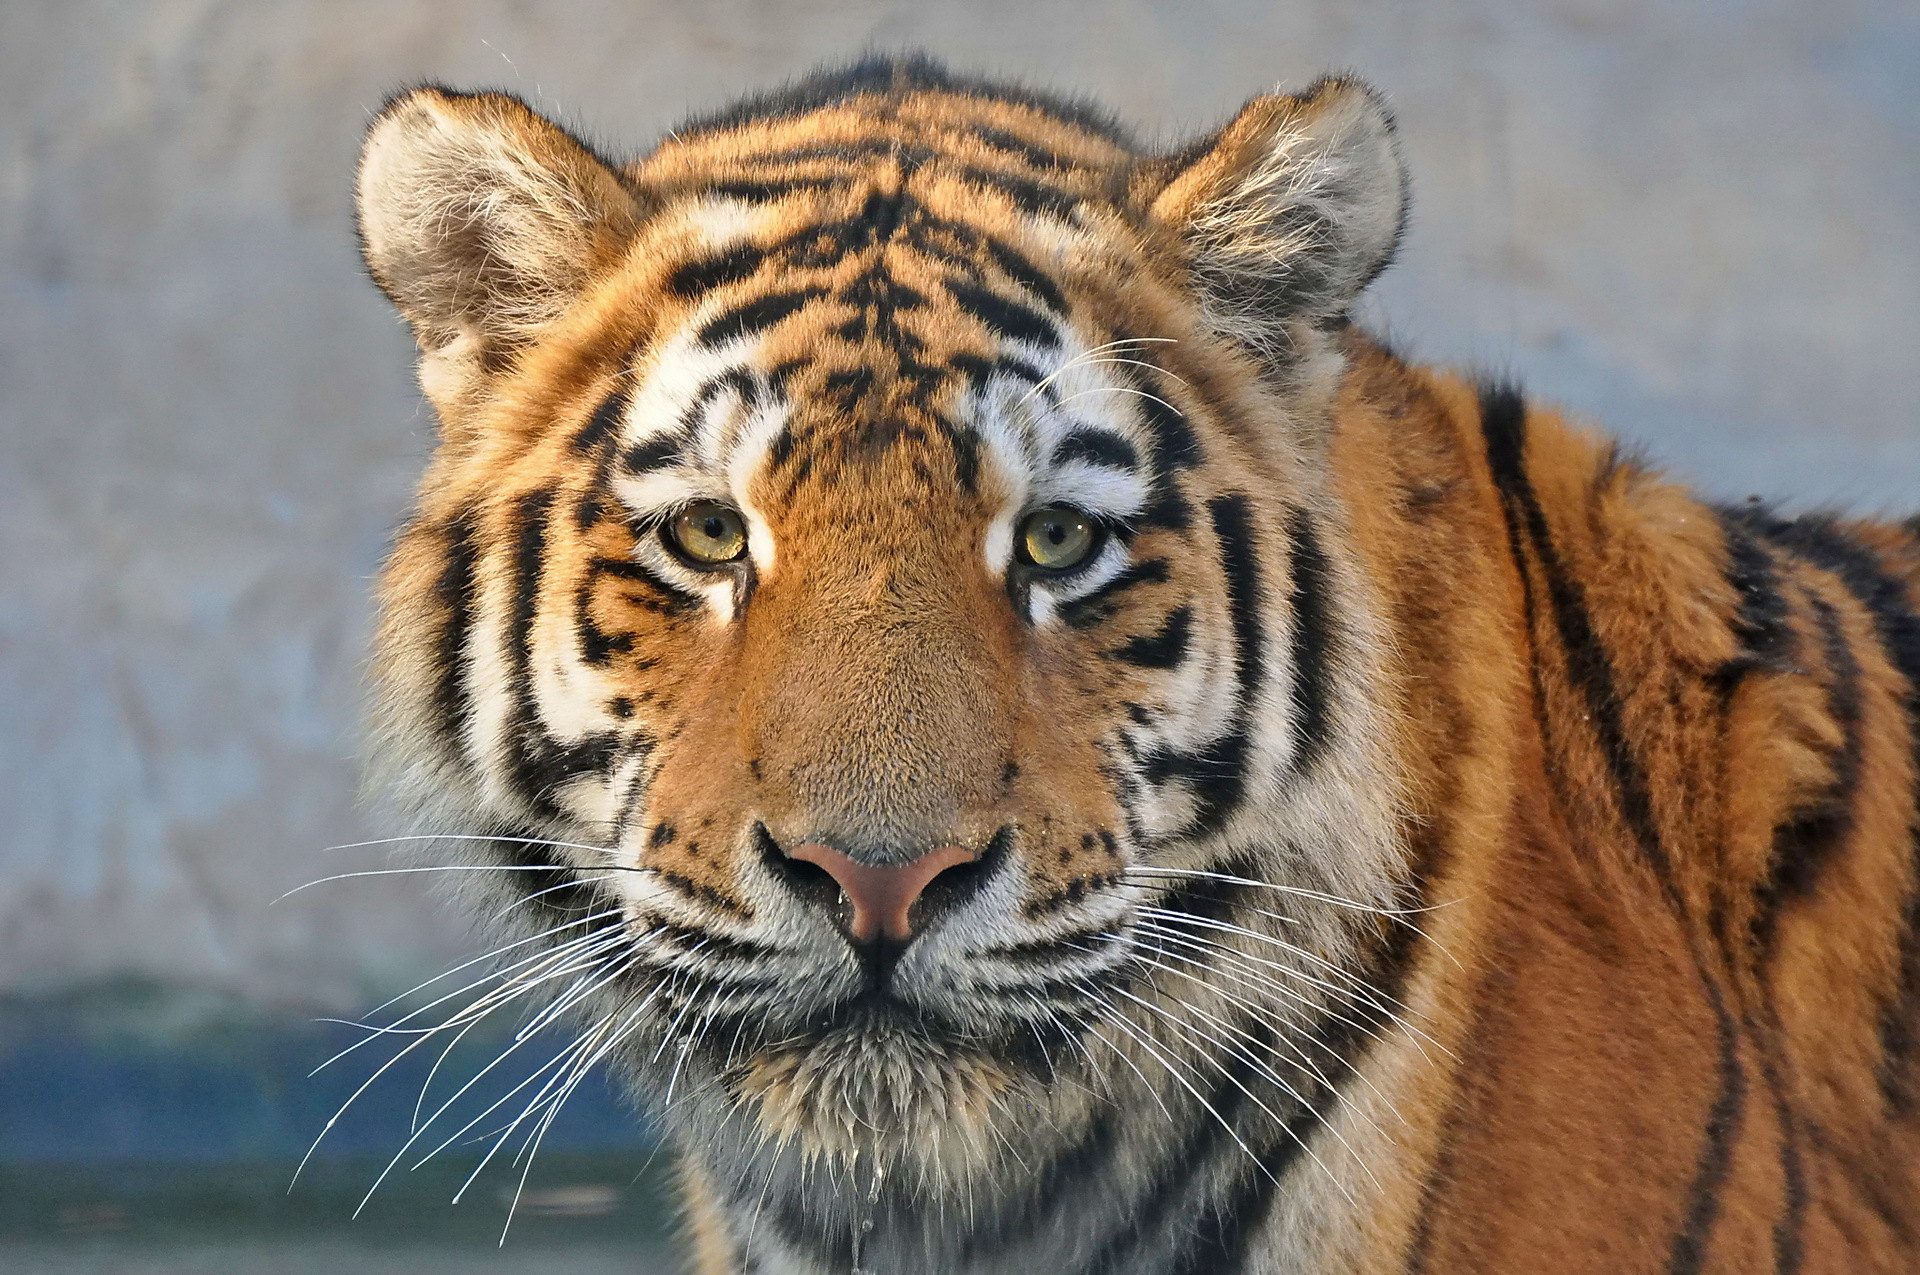 ig, Cats, Tigers, Glance, Snout, Animals Wallpaper